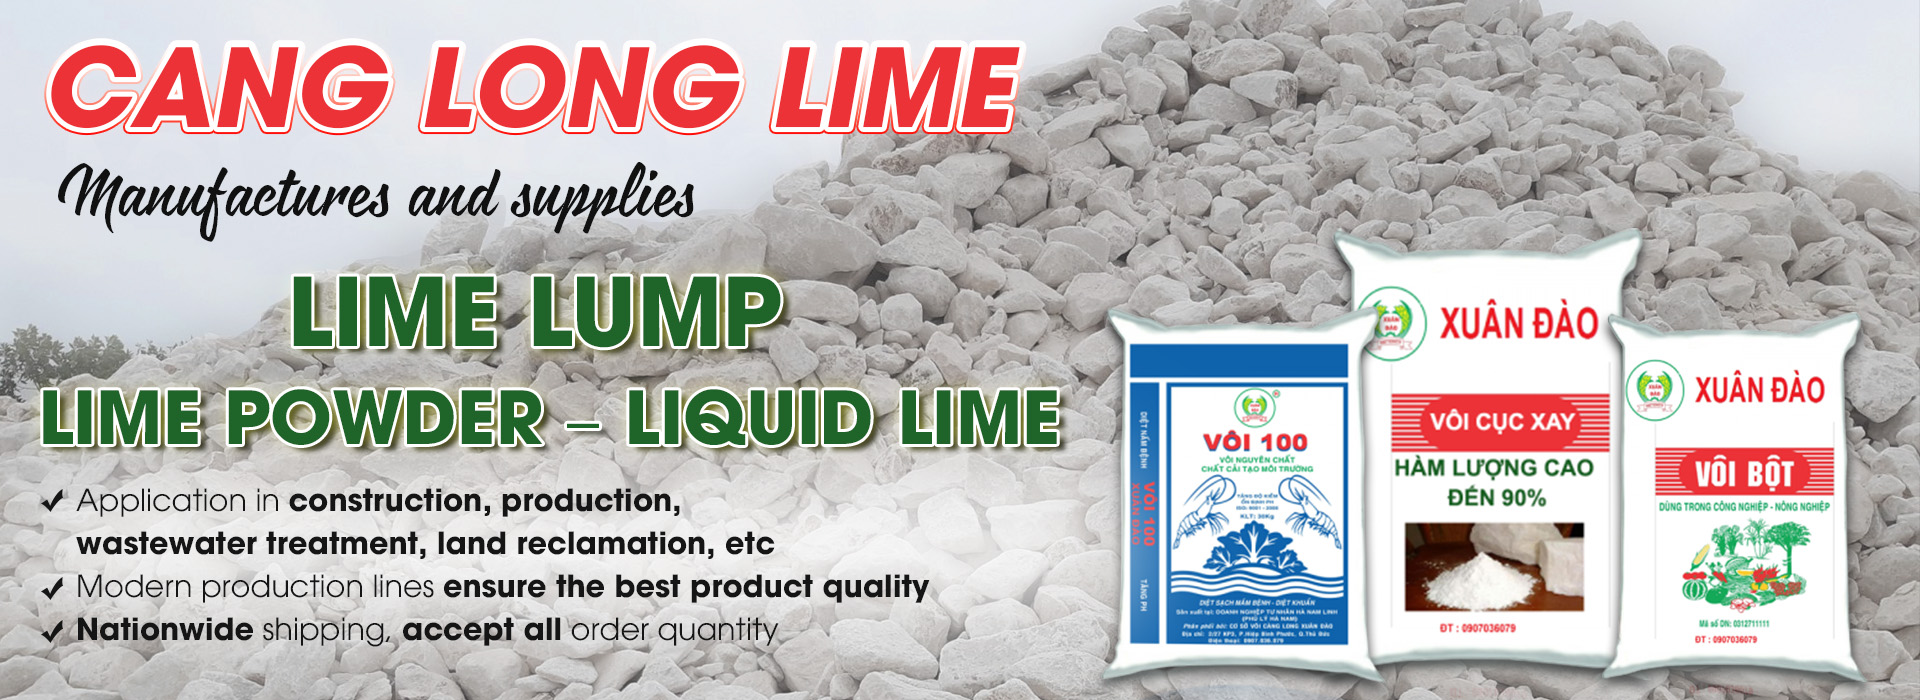 Cang Long Lime Company Limitted